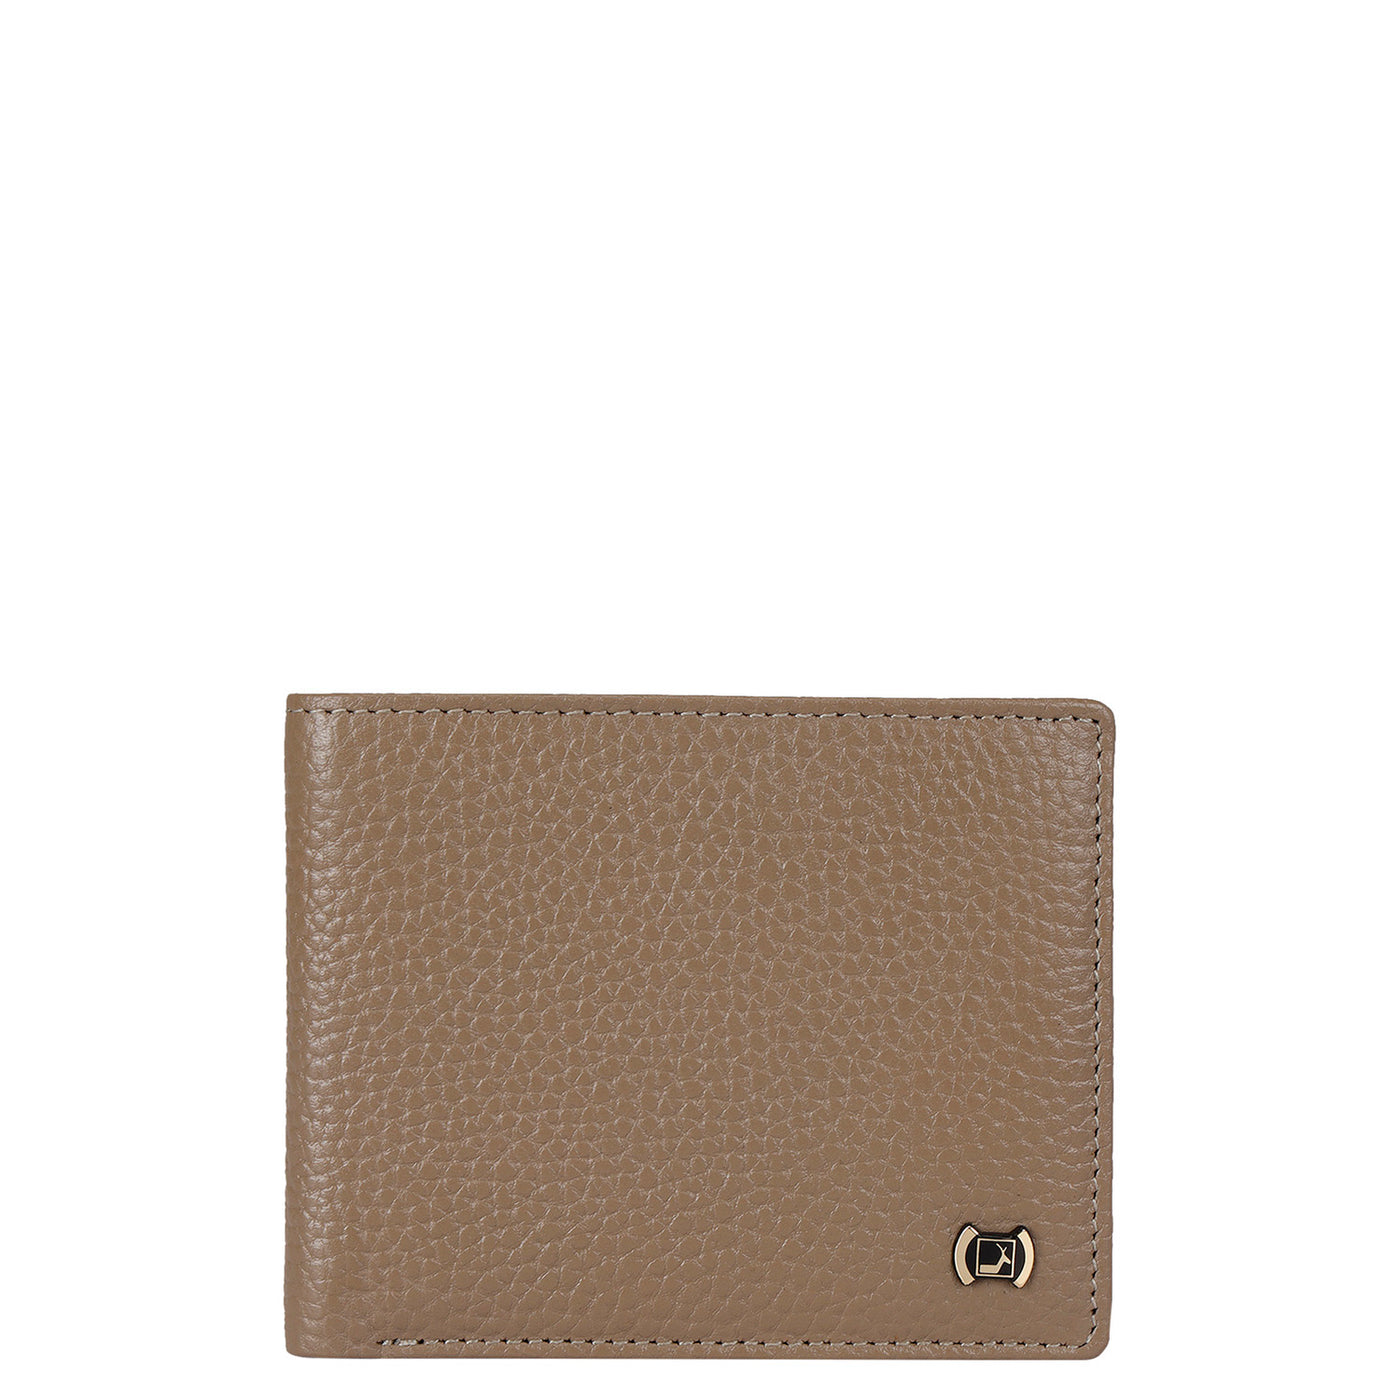 Wax Leather Mens Wallet - Greyish Taupe